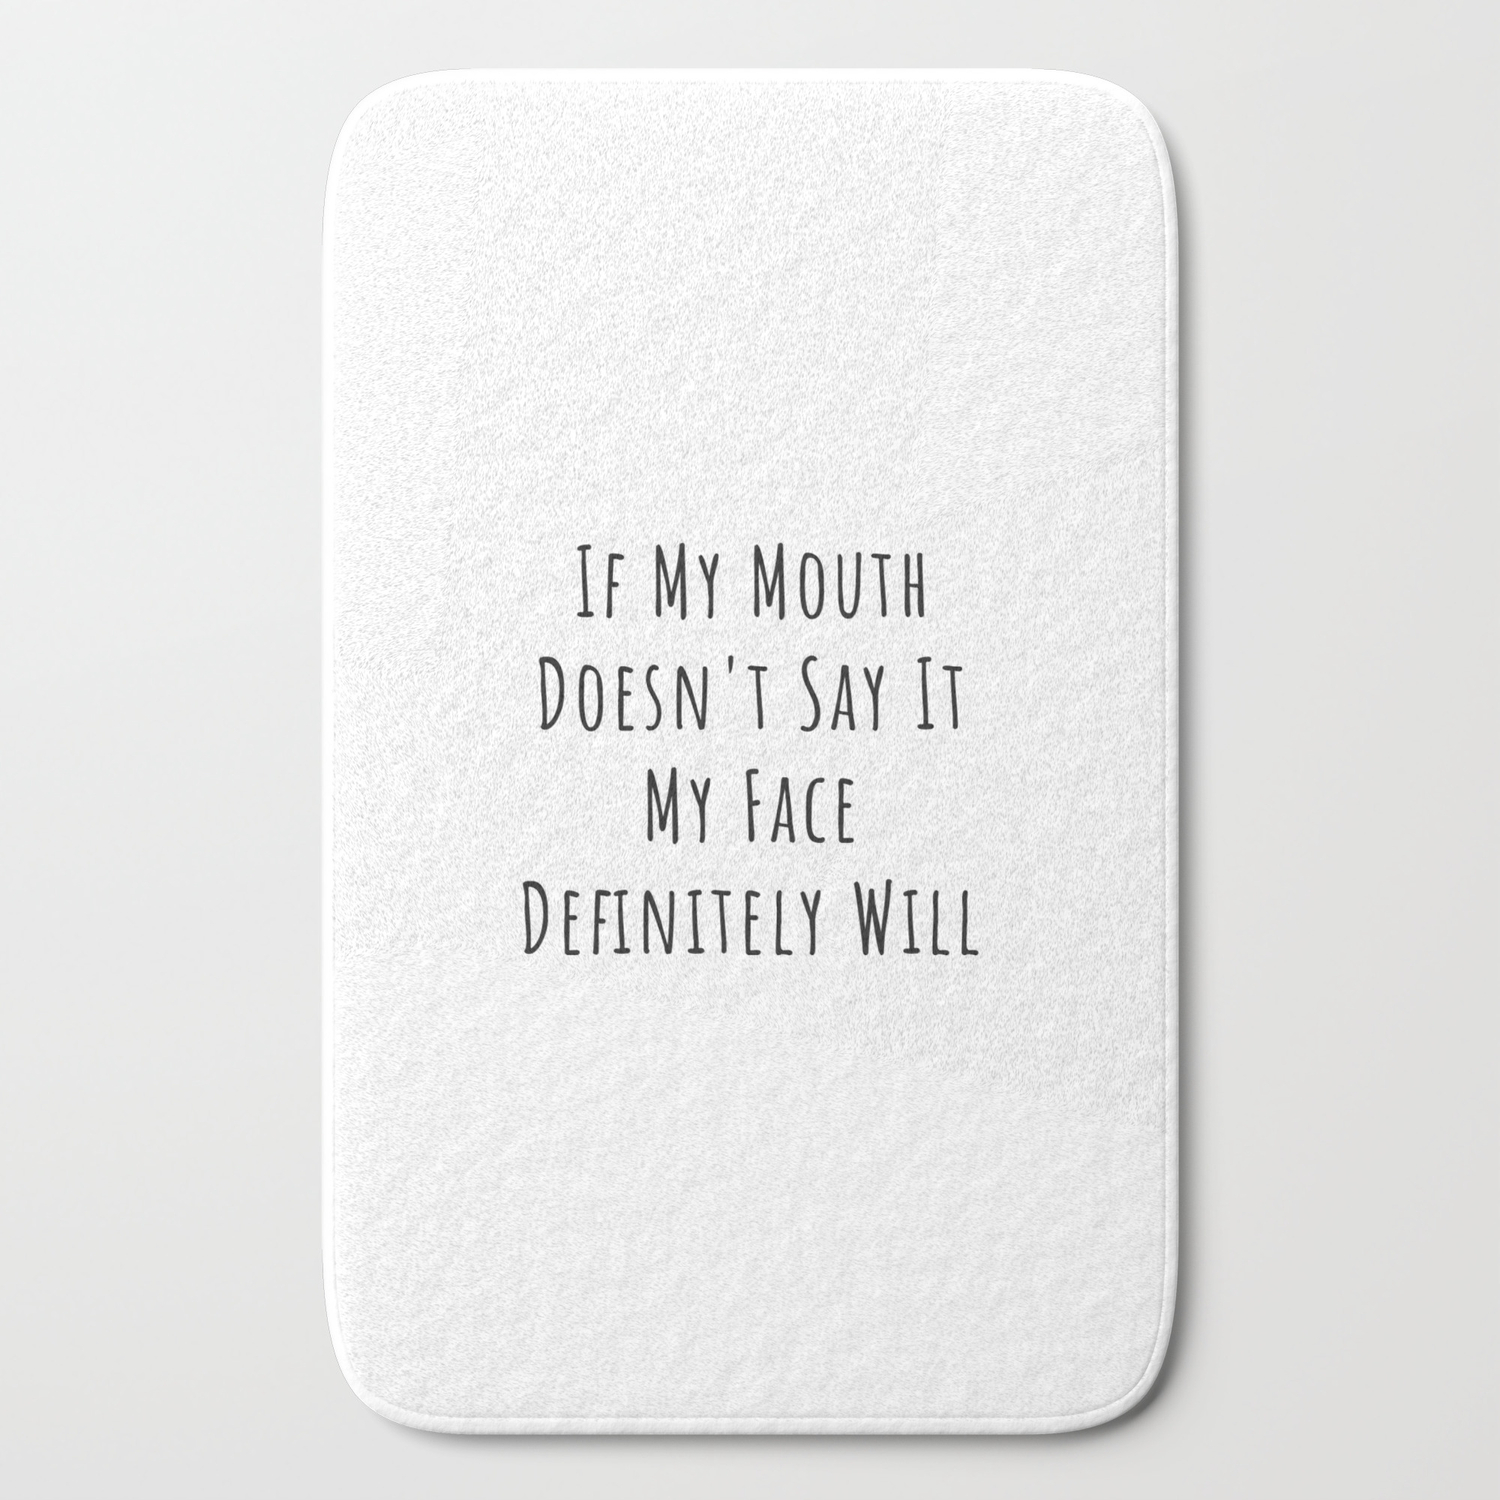 If My Mouth Doesn t Say It My Face Definitely Will. Funny Sarcastic Sayings  Quotes Bath Mat by Quote Store | Society6